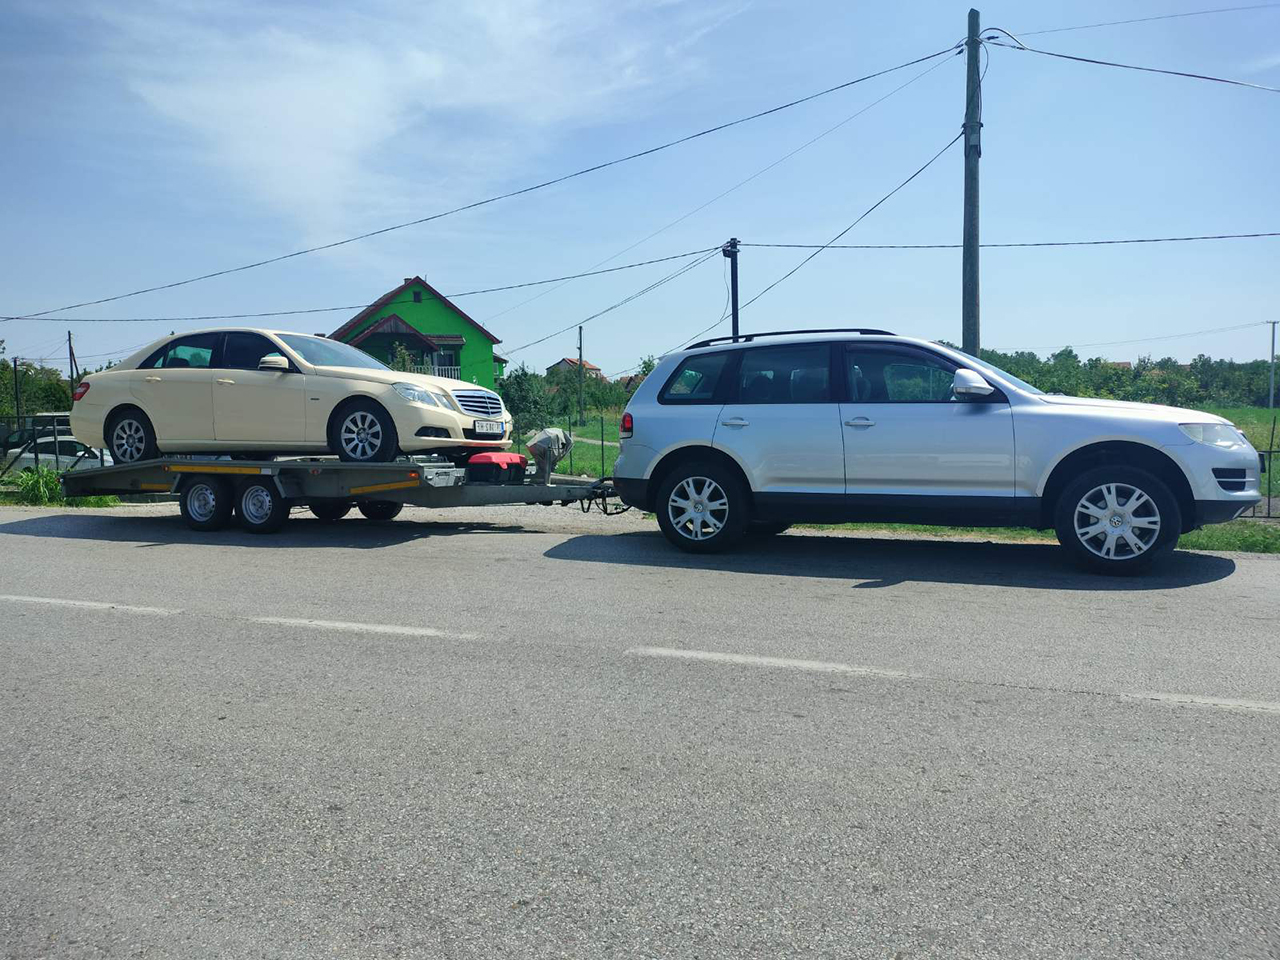 Photo 7 - TOWING SERVICE POPOVIC - Towing services, Zrenjanin